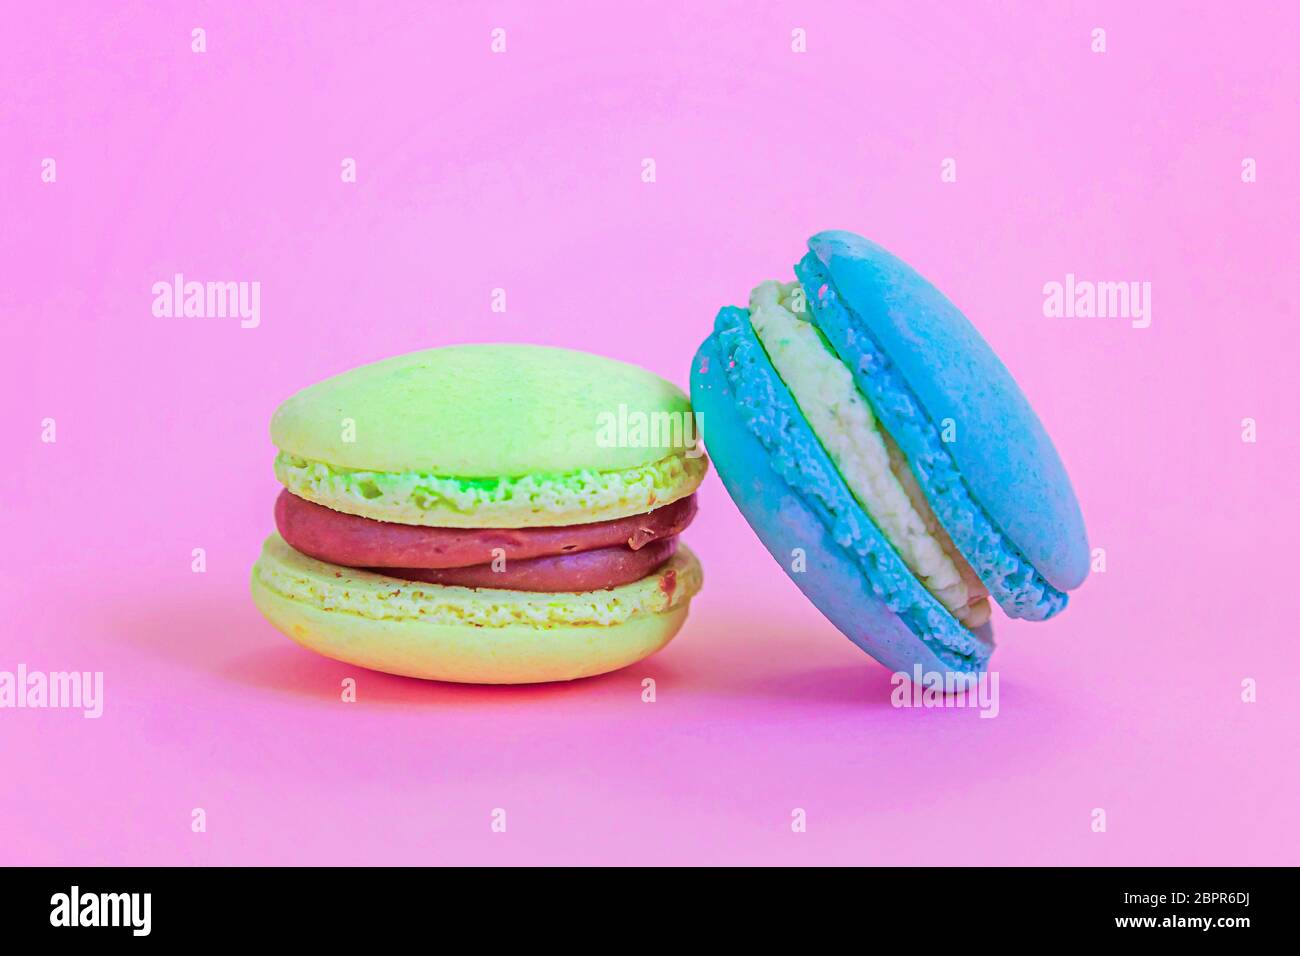 Sweet almond colorful unicorn blue yellow macaron or macaroon dessert cake isolated on trendy pink pastel background. French sweet cookie. Minimal foo Stock Photo